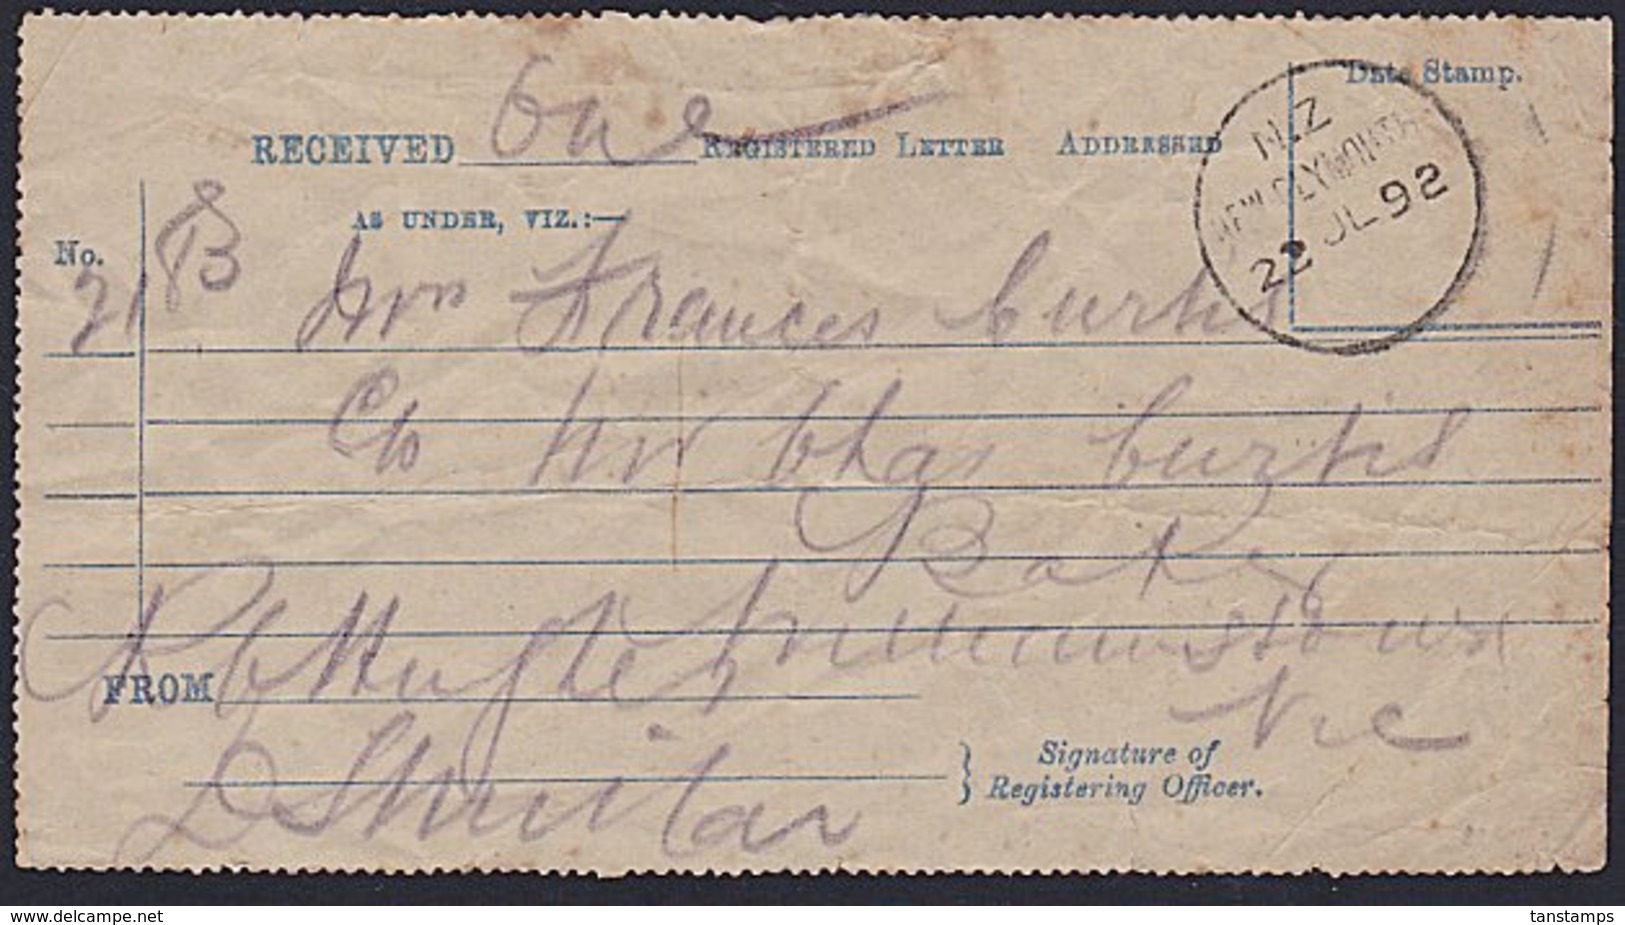 NEW ZEALAND VICTORIAN REGISTERED LETTER ACKNOWLEDGEMENT RECEIPT - Covers & Documents